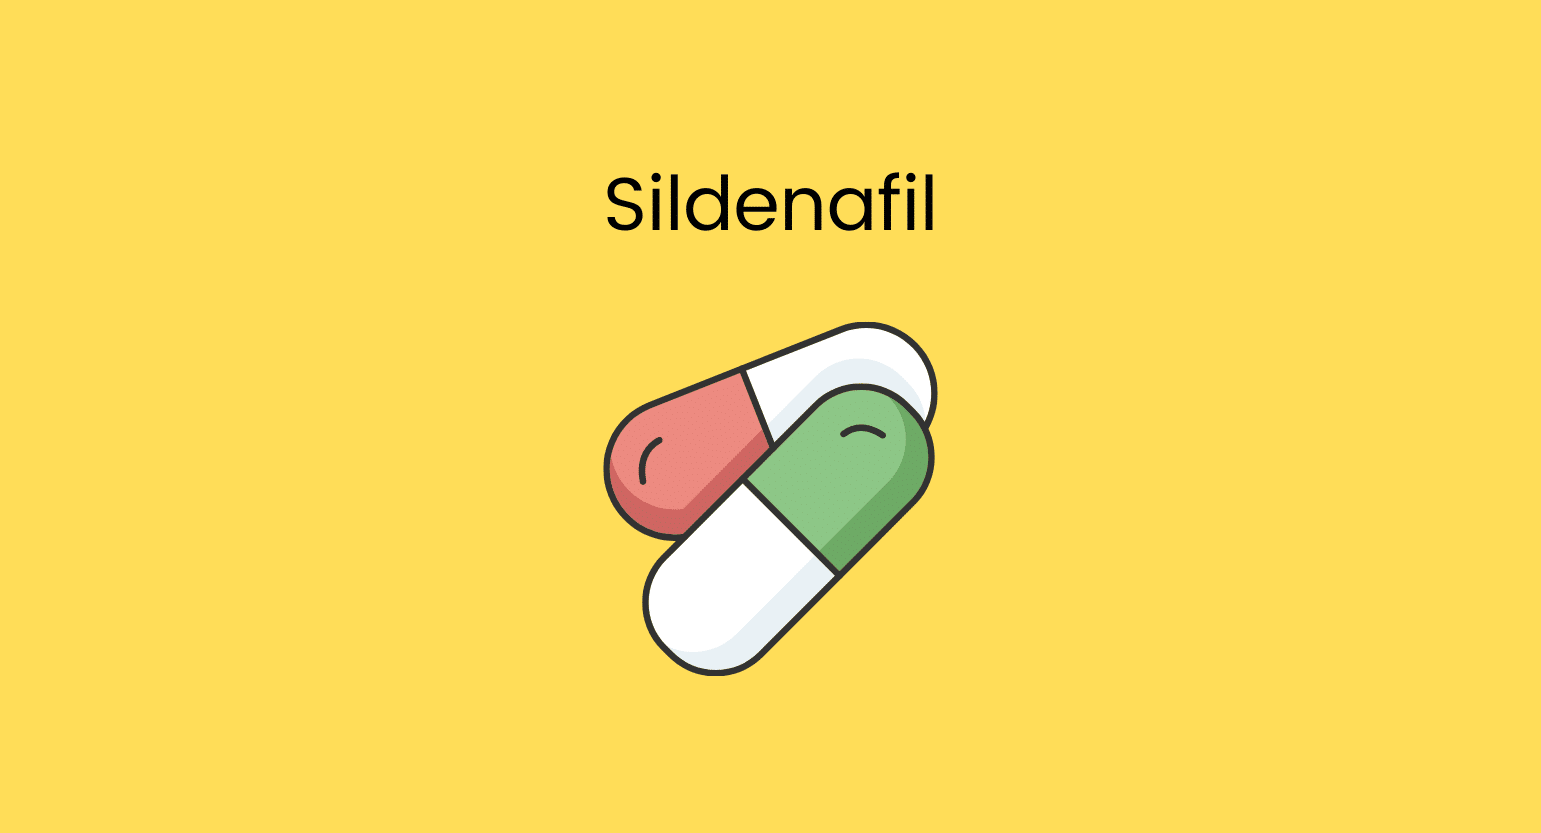 Do’s and Dont’s: Kratom and Sildenafil (Viagra)